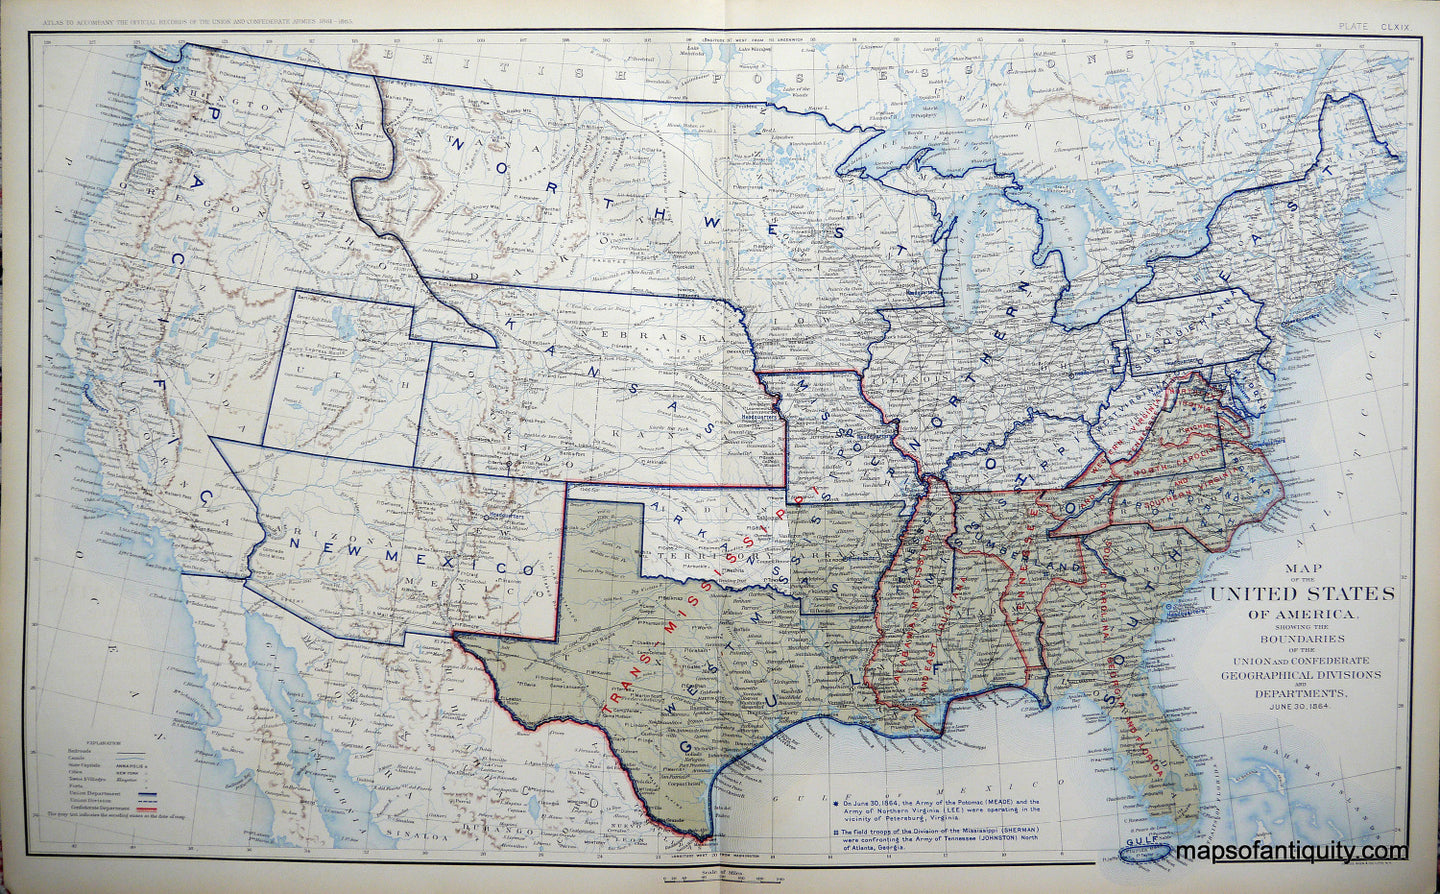 Antique-printed-color-map-United-States-******-United-States-United-States-General---1891-Bien-Maps-Of-Antiquity